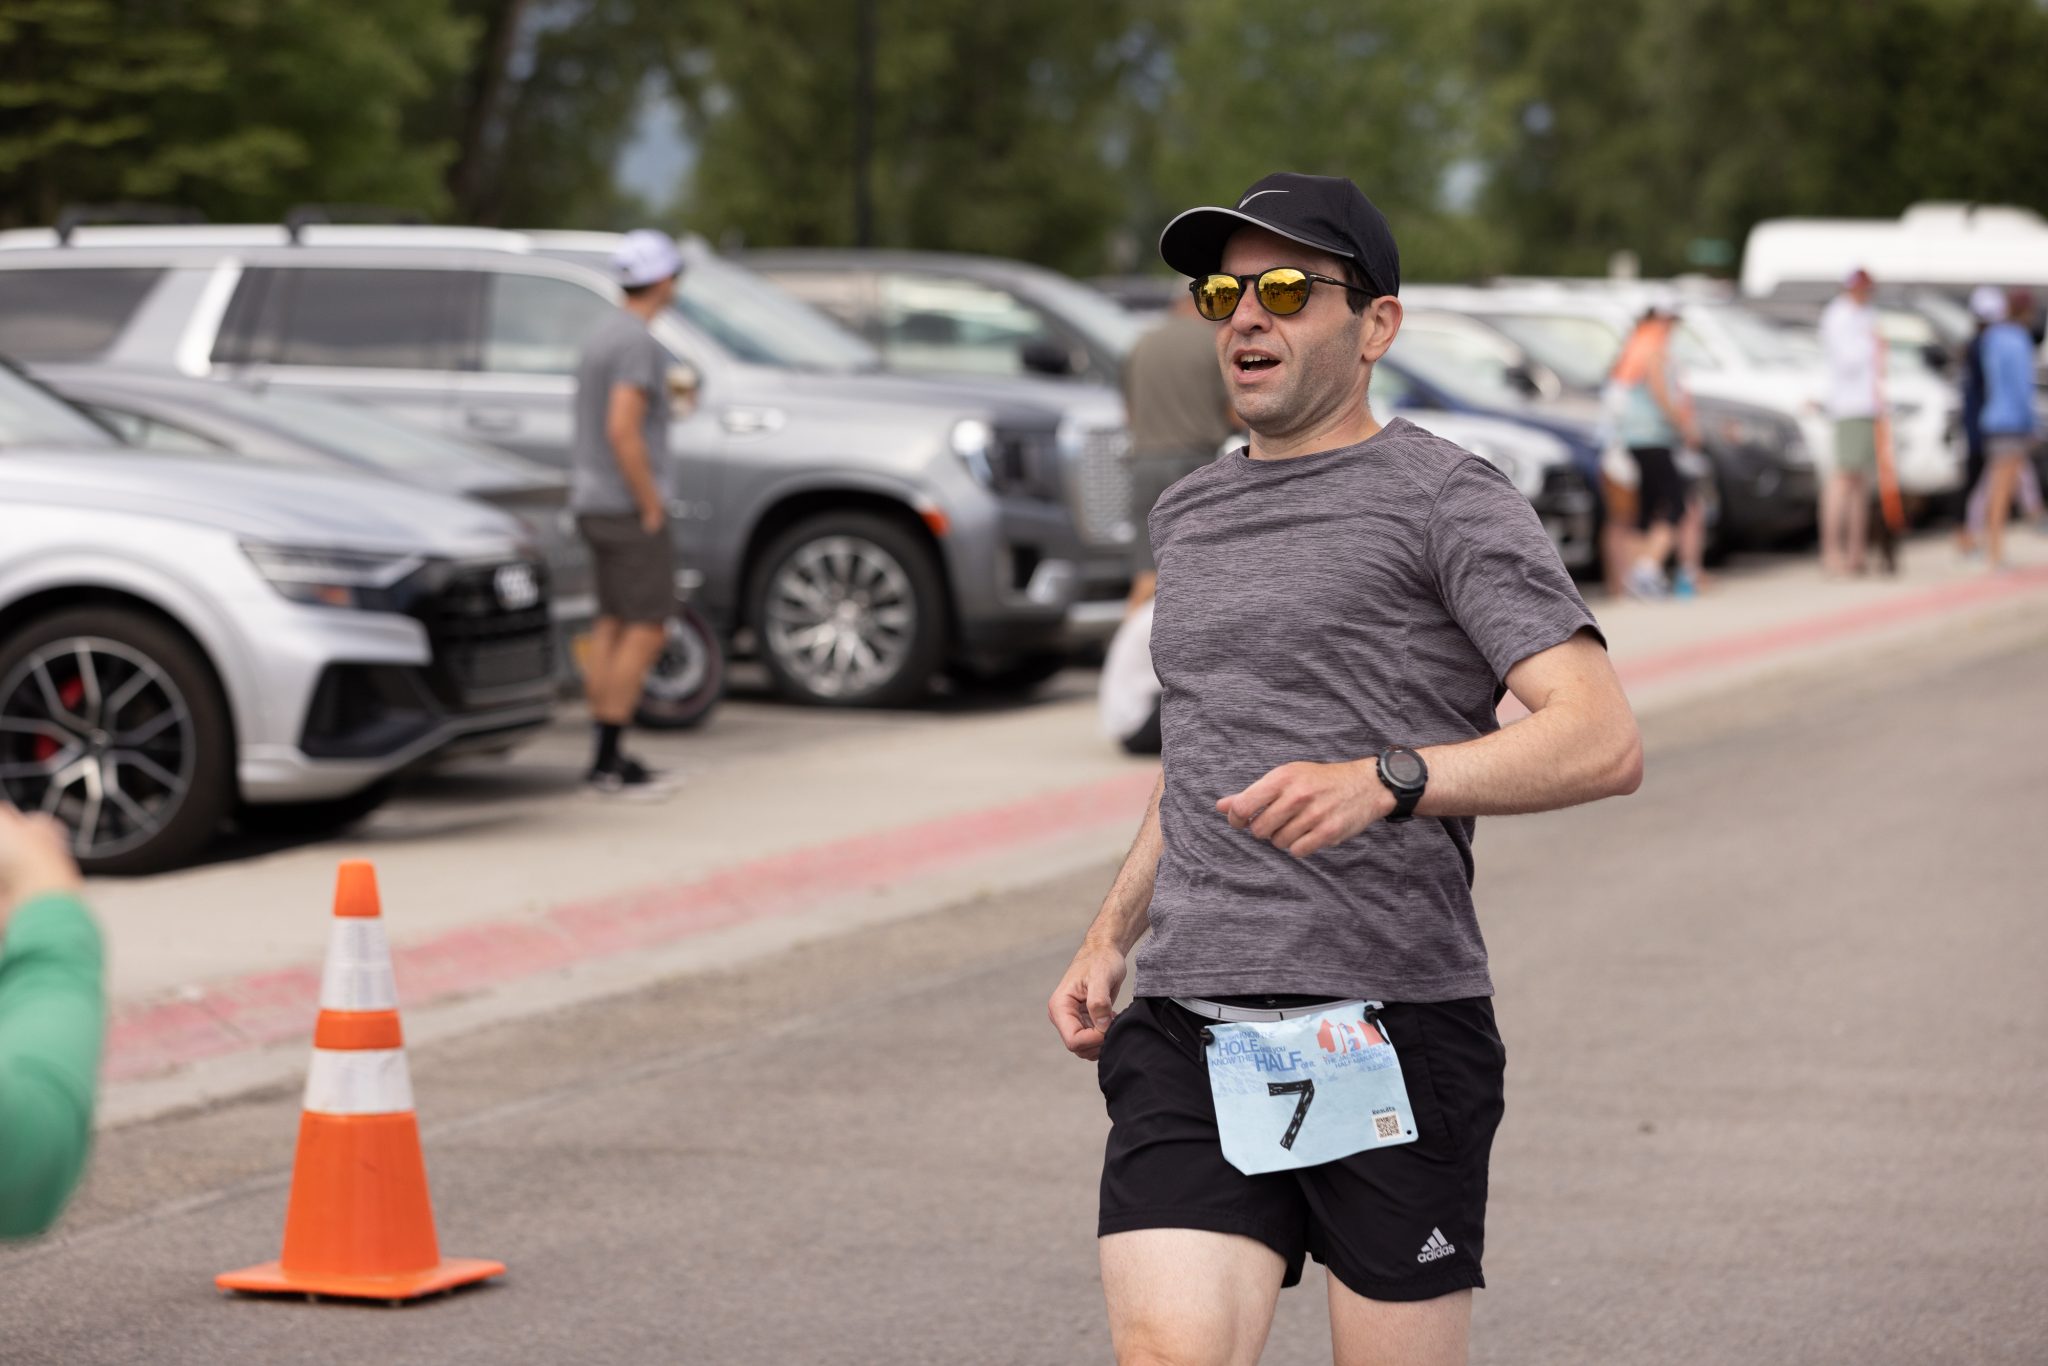 Guillermo Esteves, seen mid-stride while arriving at the finish line of the Jackson Hole Marathon, and wearing a black cap, gold sunglasses, gray t-shirt, black shorts, and a race bib with the number 7.